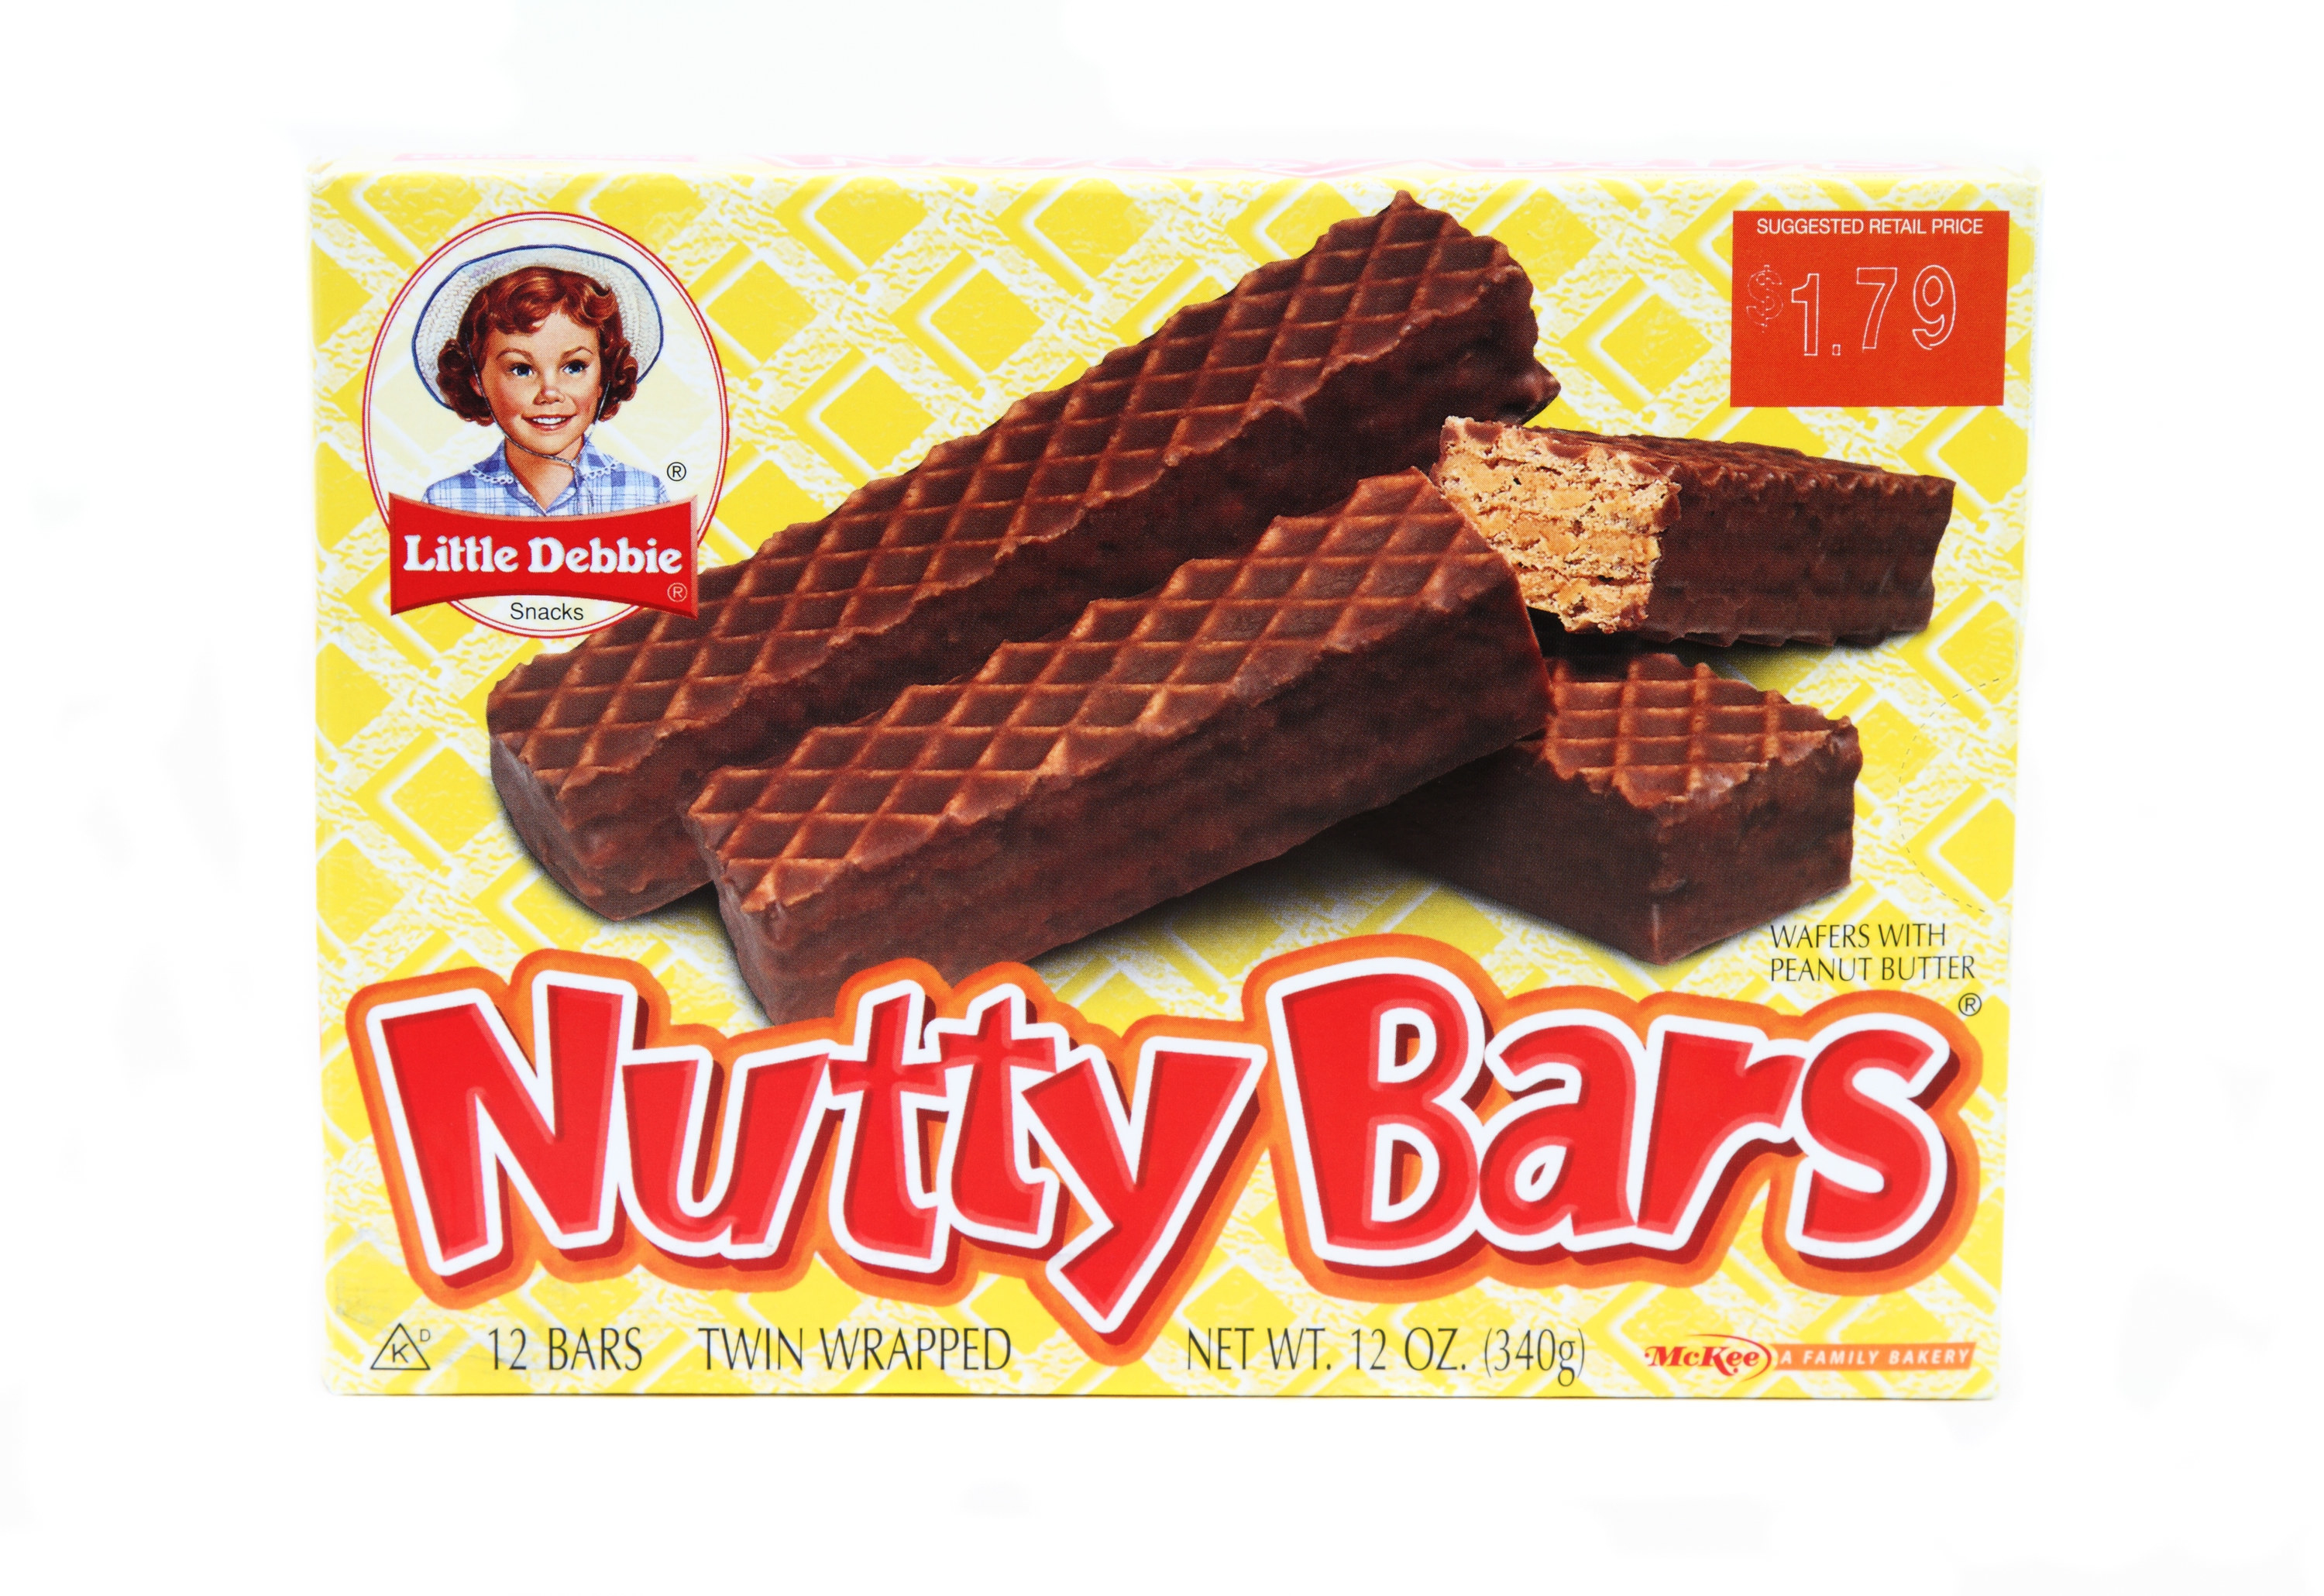 An image of the little debbie nutty bars